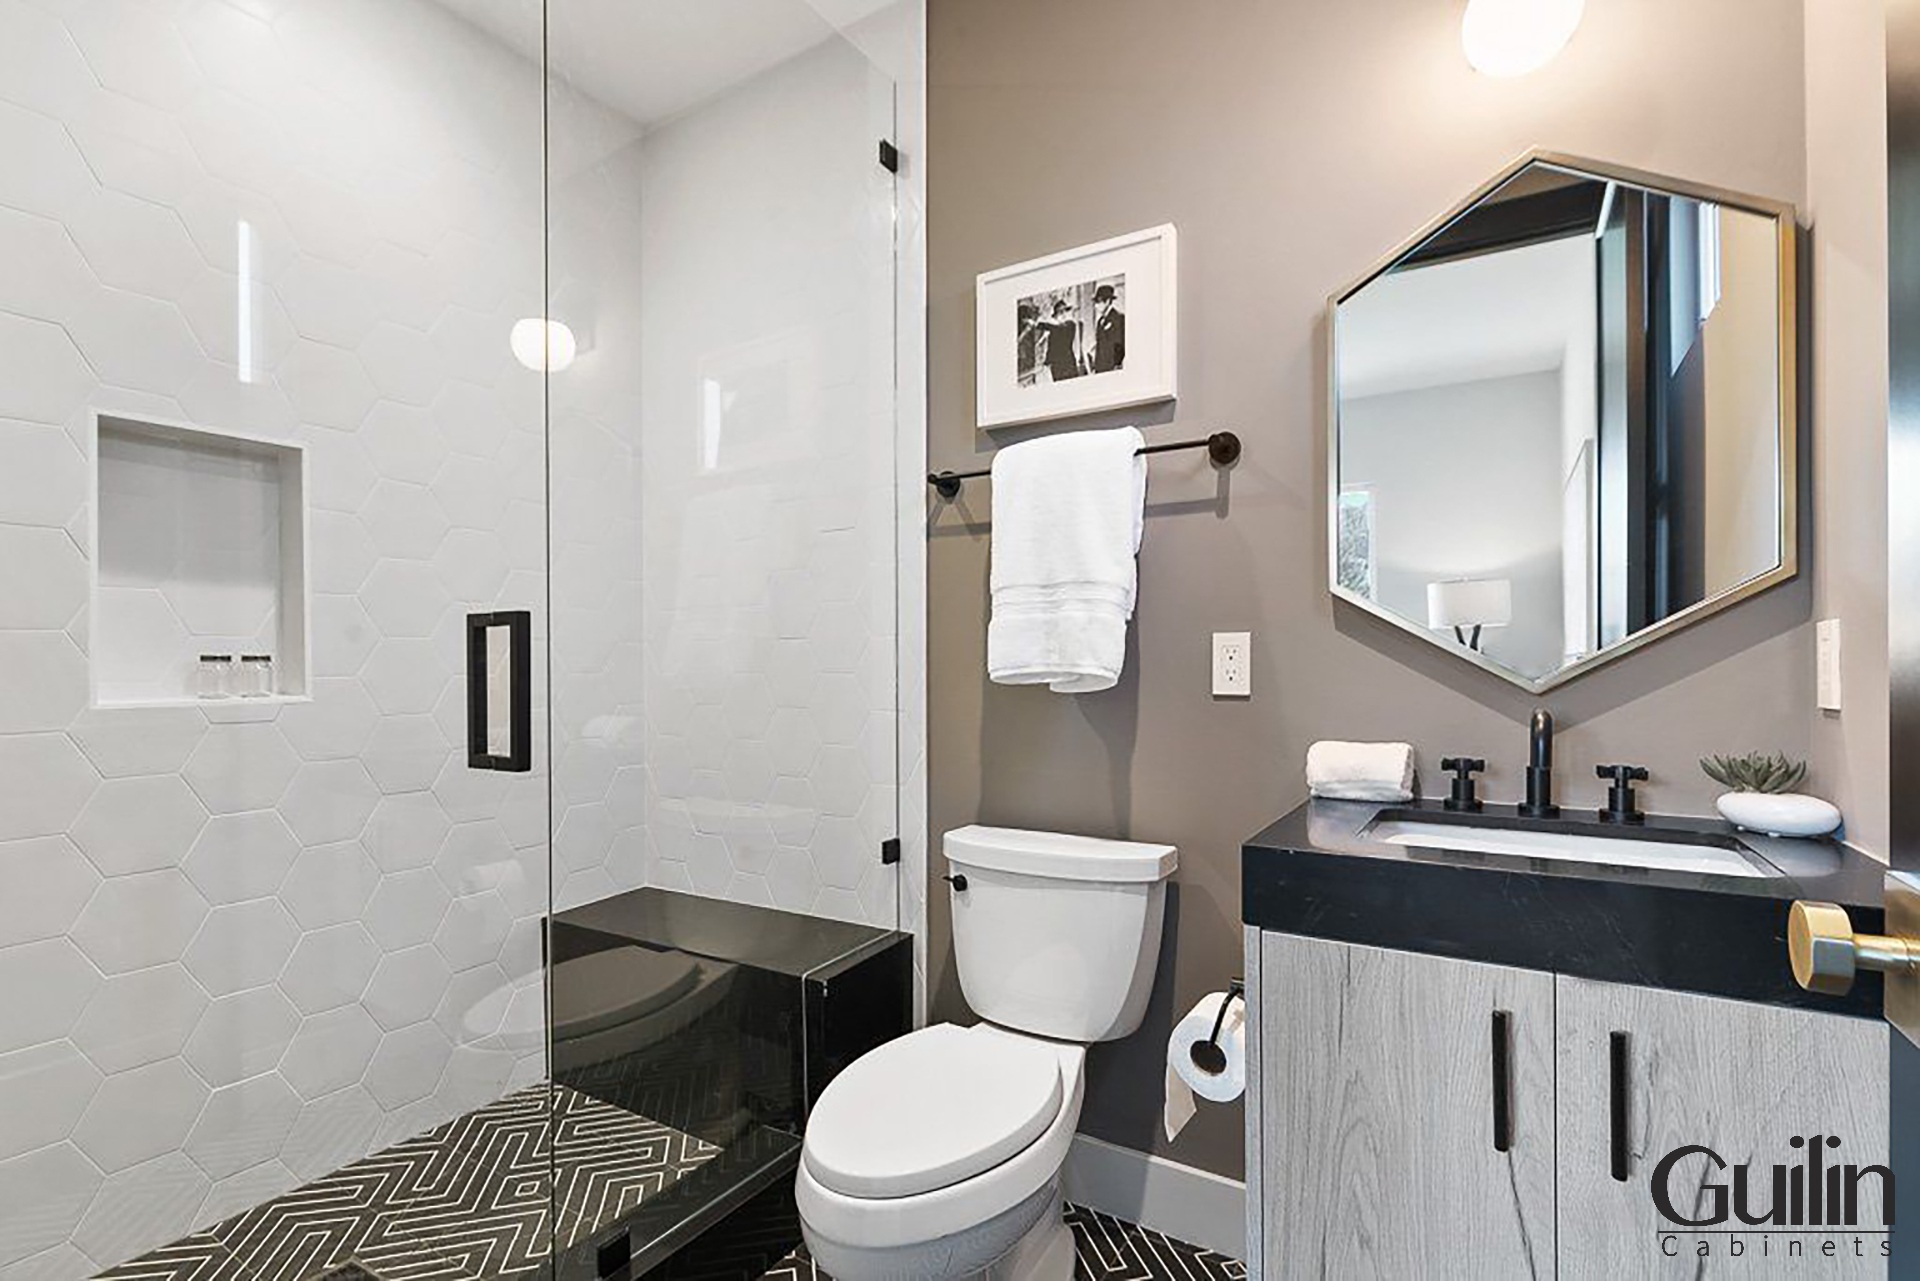 Three-quarter bathrooms might not be the most common type of bathroom, but they can be an excellent way to save costs and maximize efficiency.